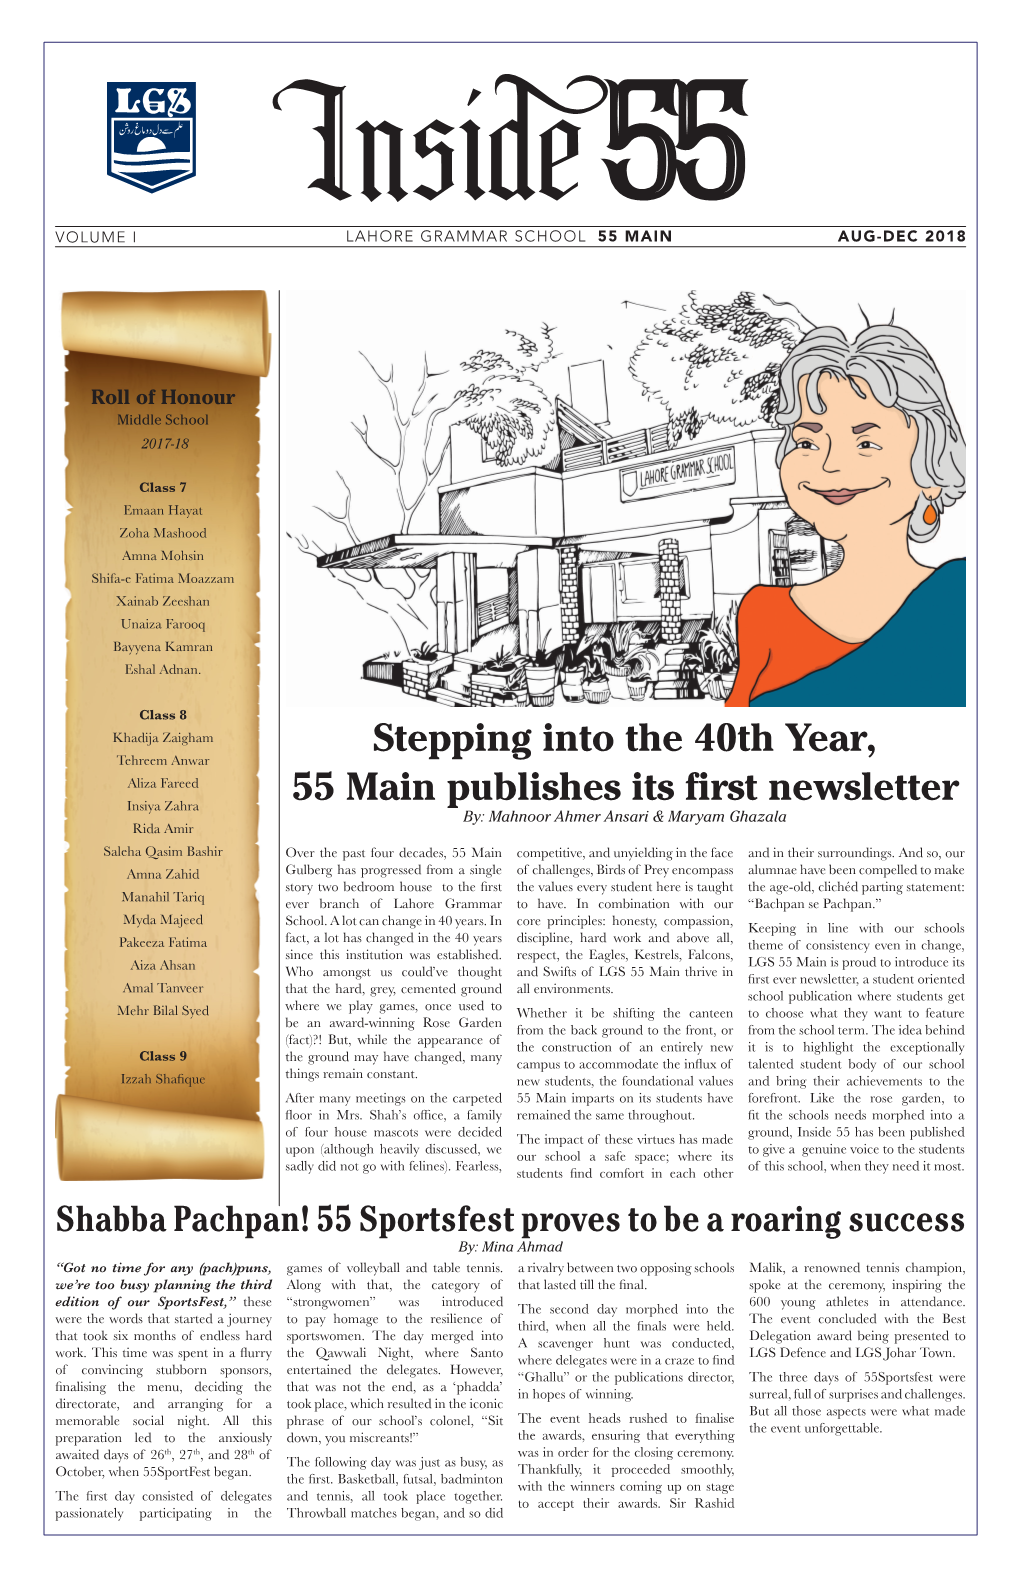 Stepping Into the 40Th Year, 55 Main Publishes Its First Newsletter